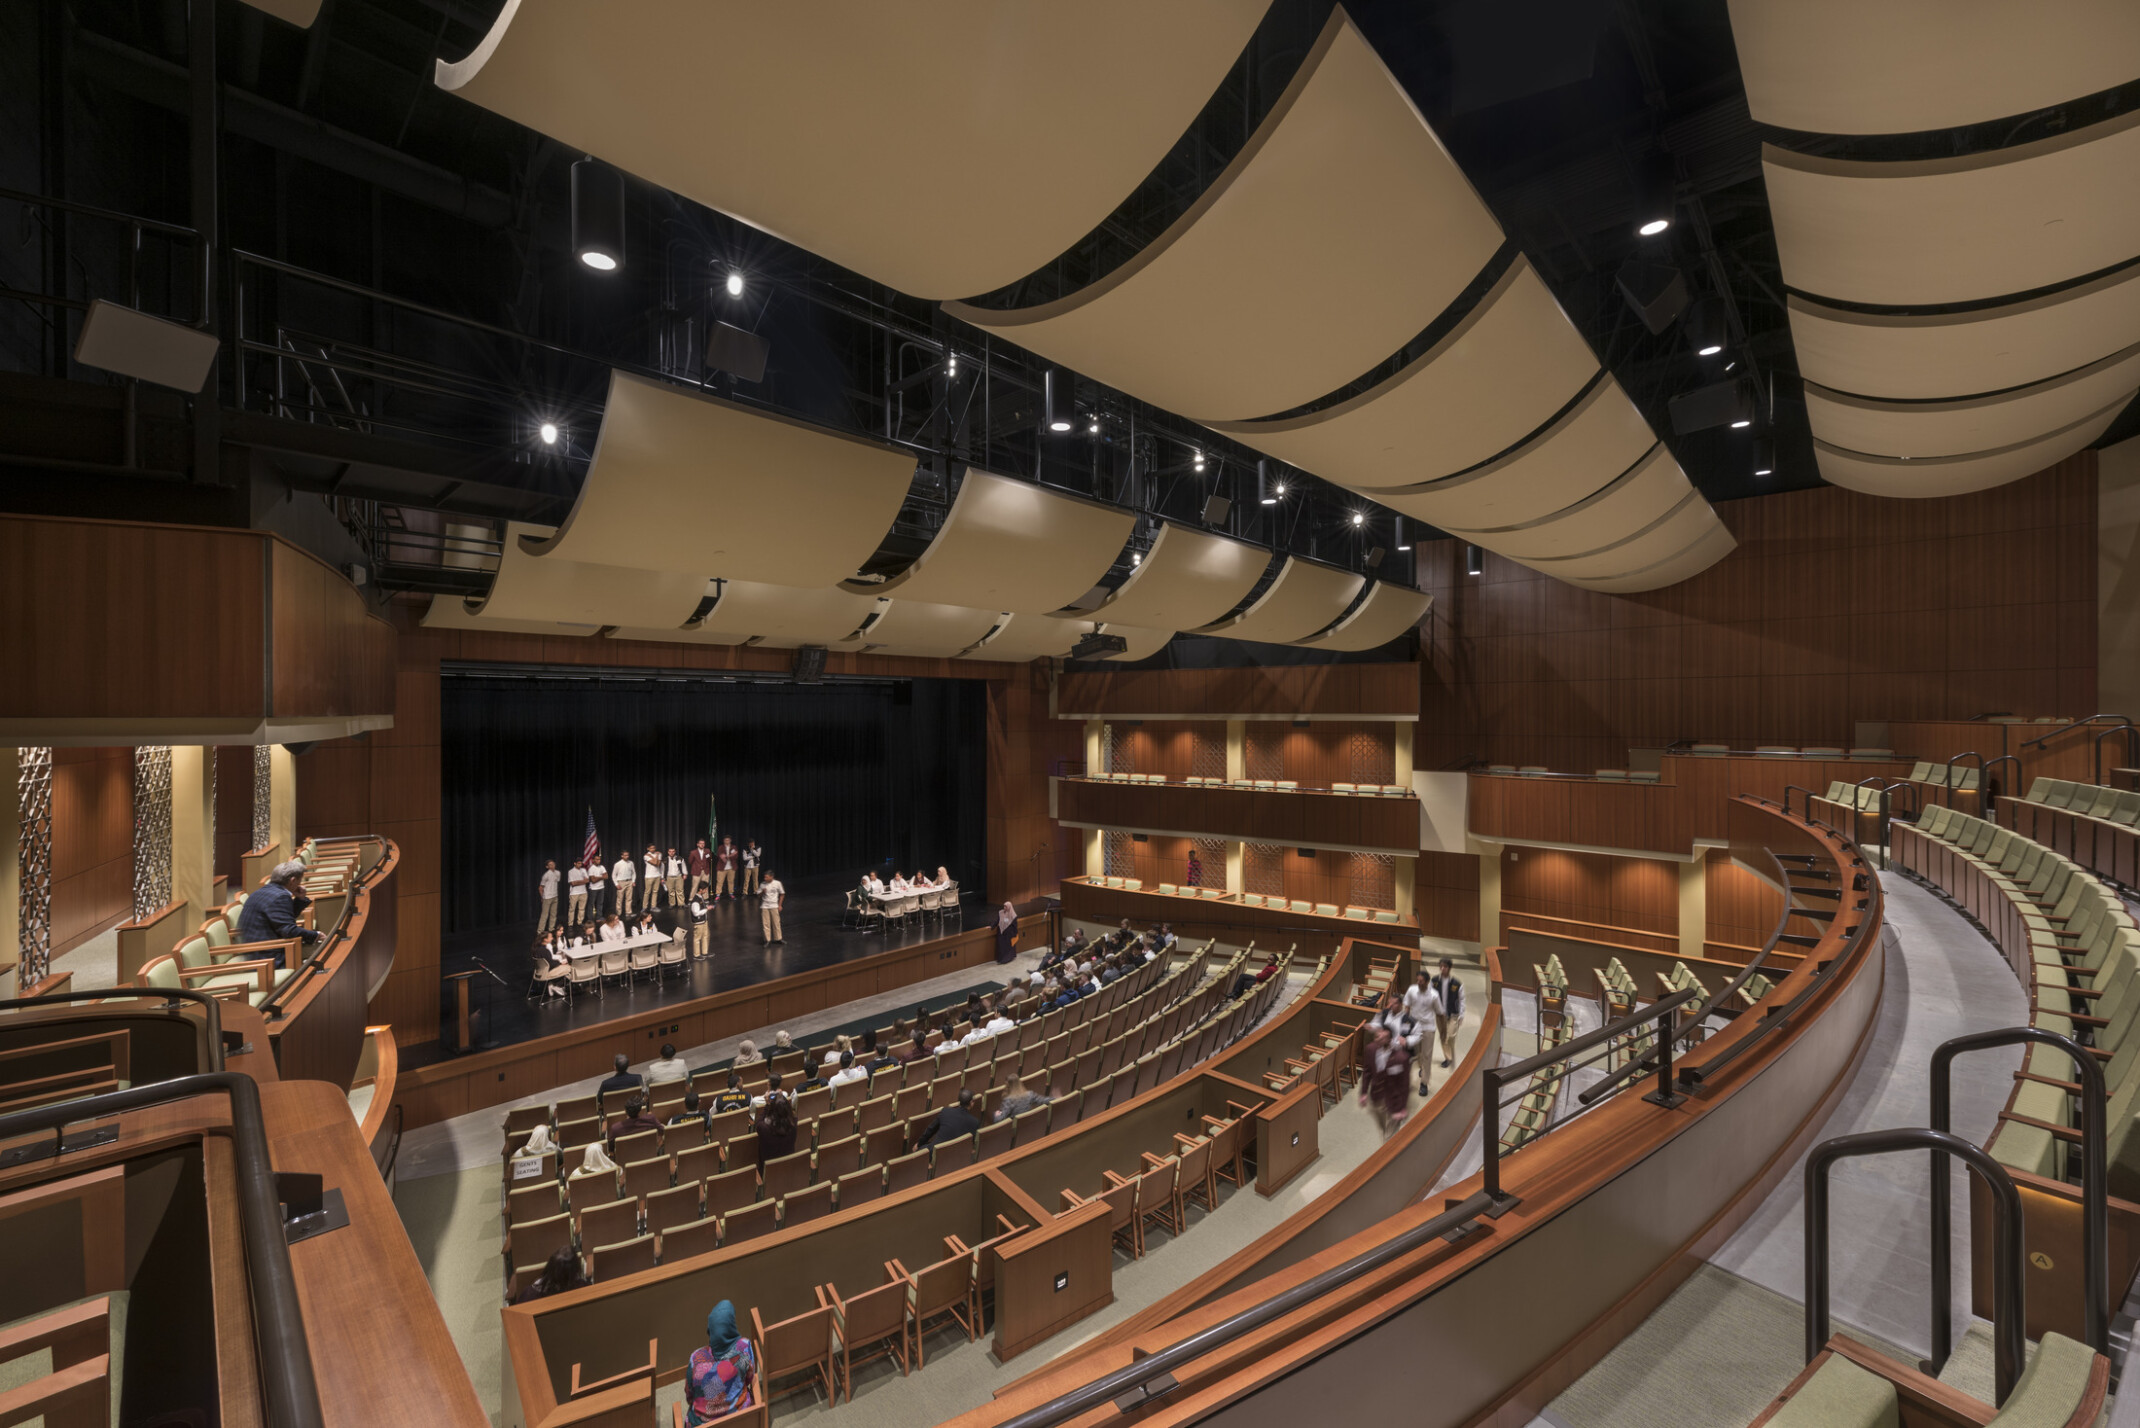 550-seat performing arts theater, view from opera boxes, suspended sound baffling, stage lighting, warm wood paneling on walls, partitions and seating, people on the stage appear to be debating or having a spelling bee